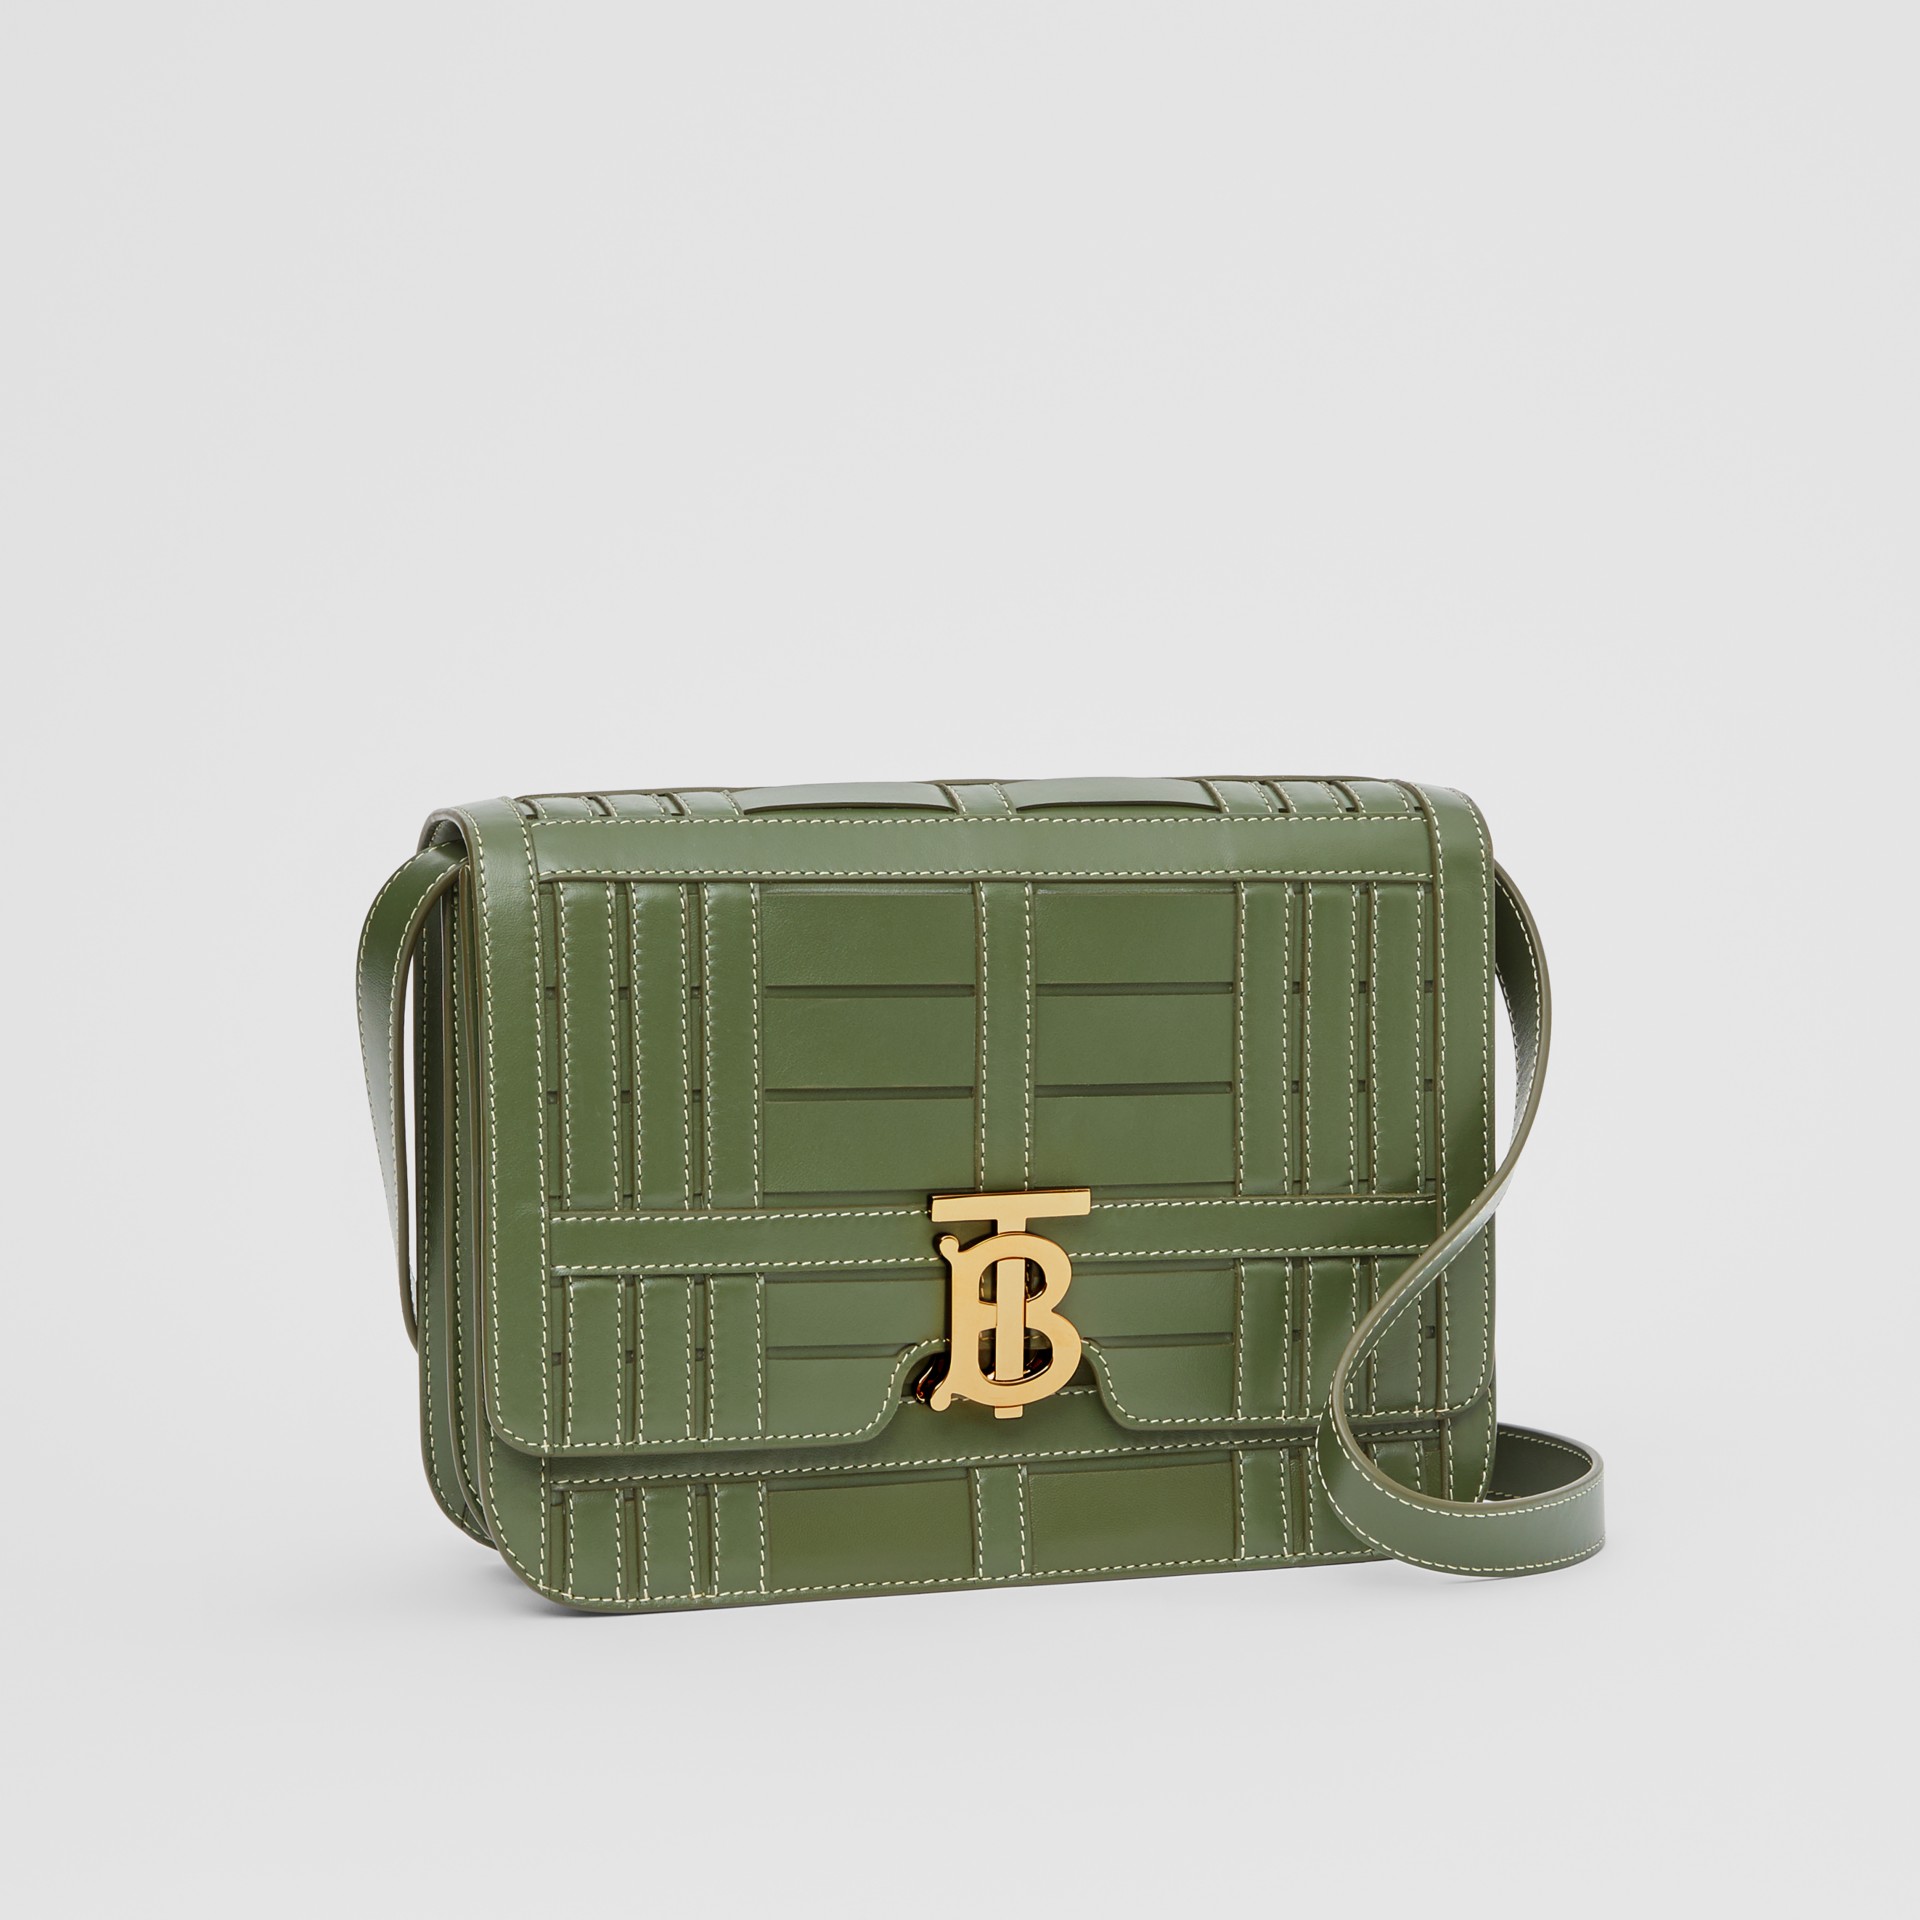 Medium Woven Leather TB Bag in Sage Green - Women | Burberry United States